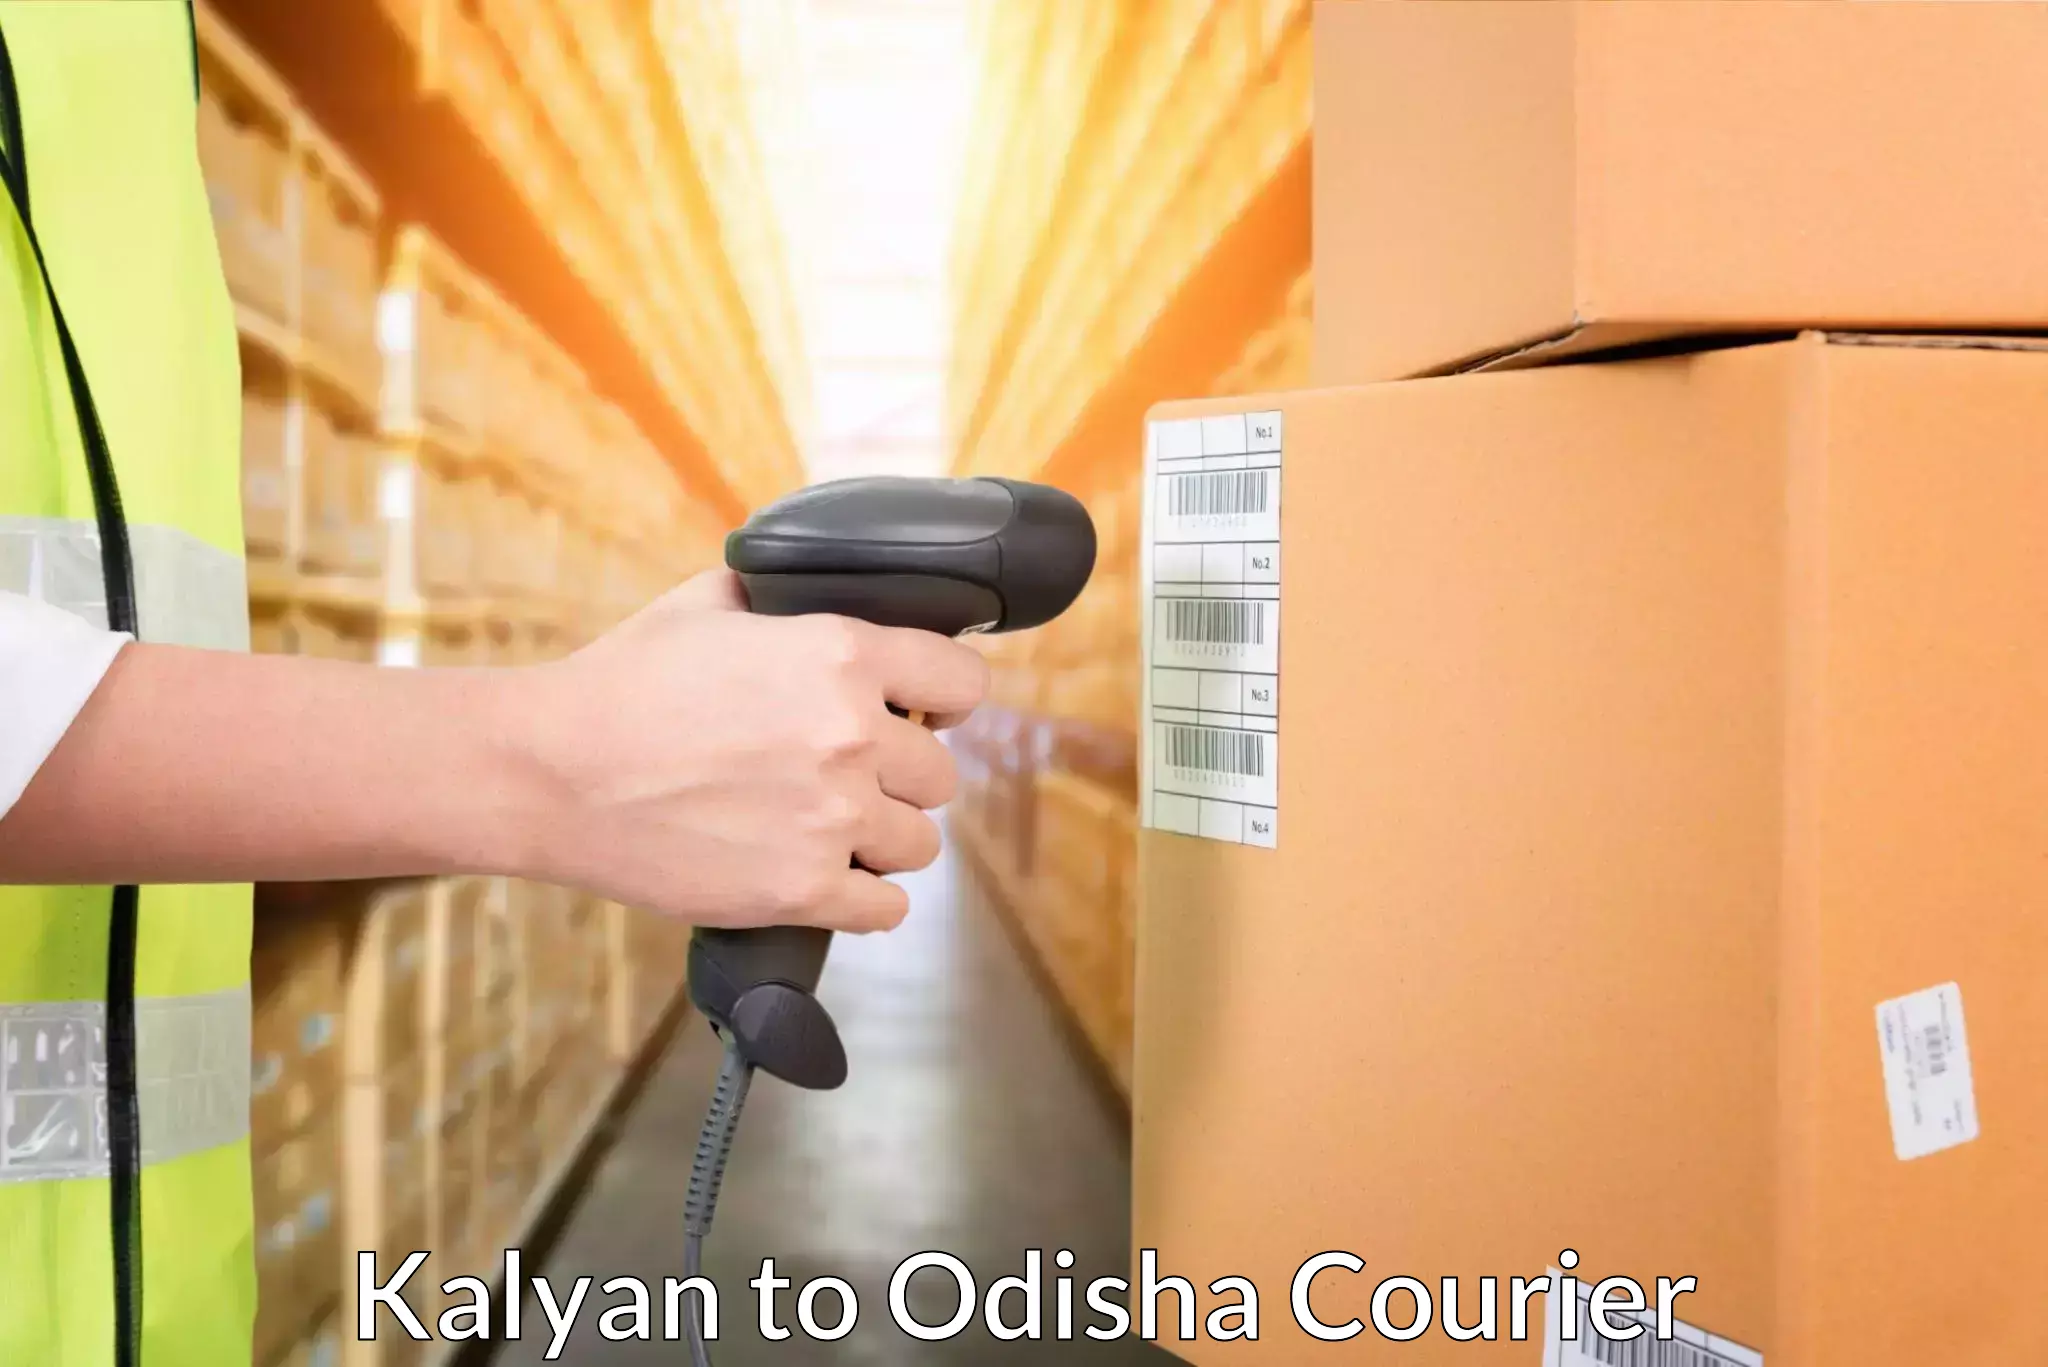 Global courier networks Kalyan to Asika